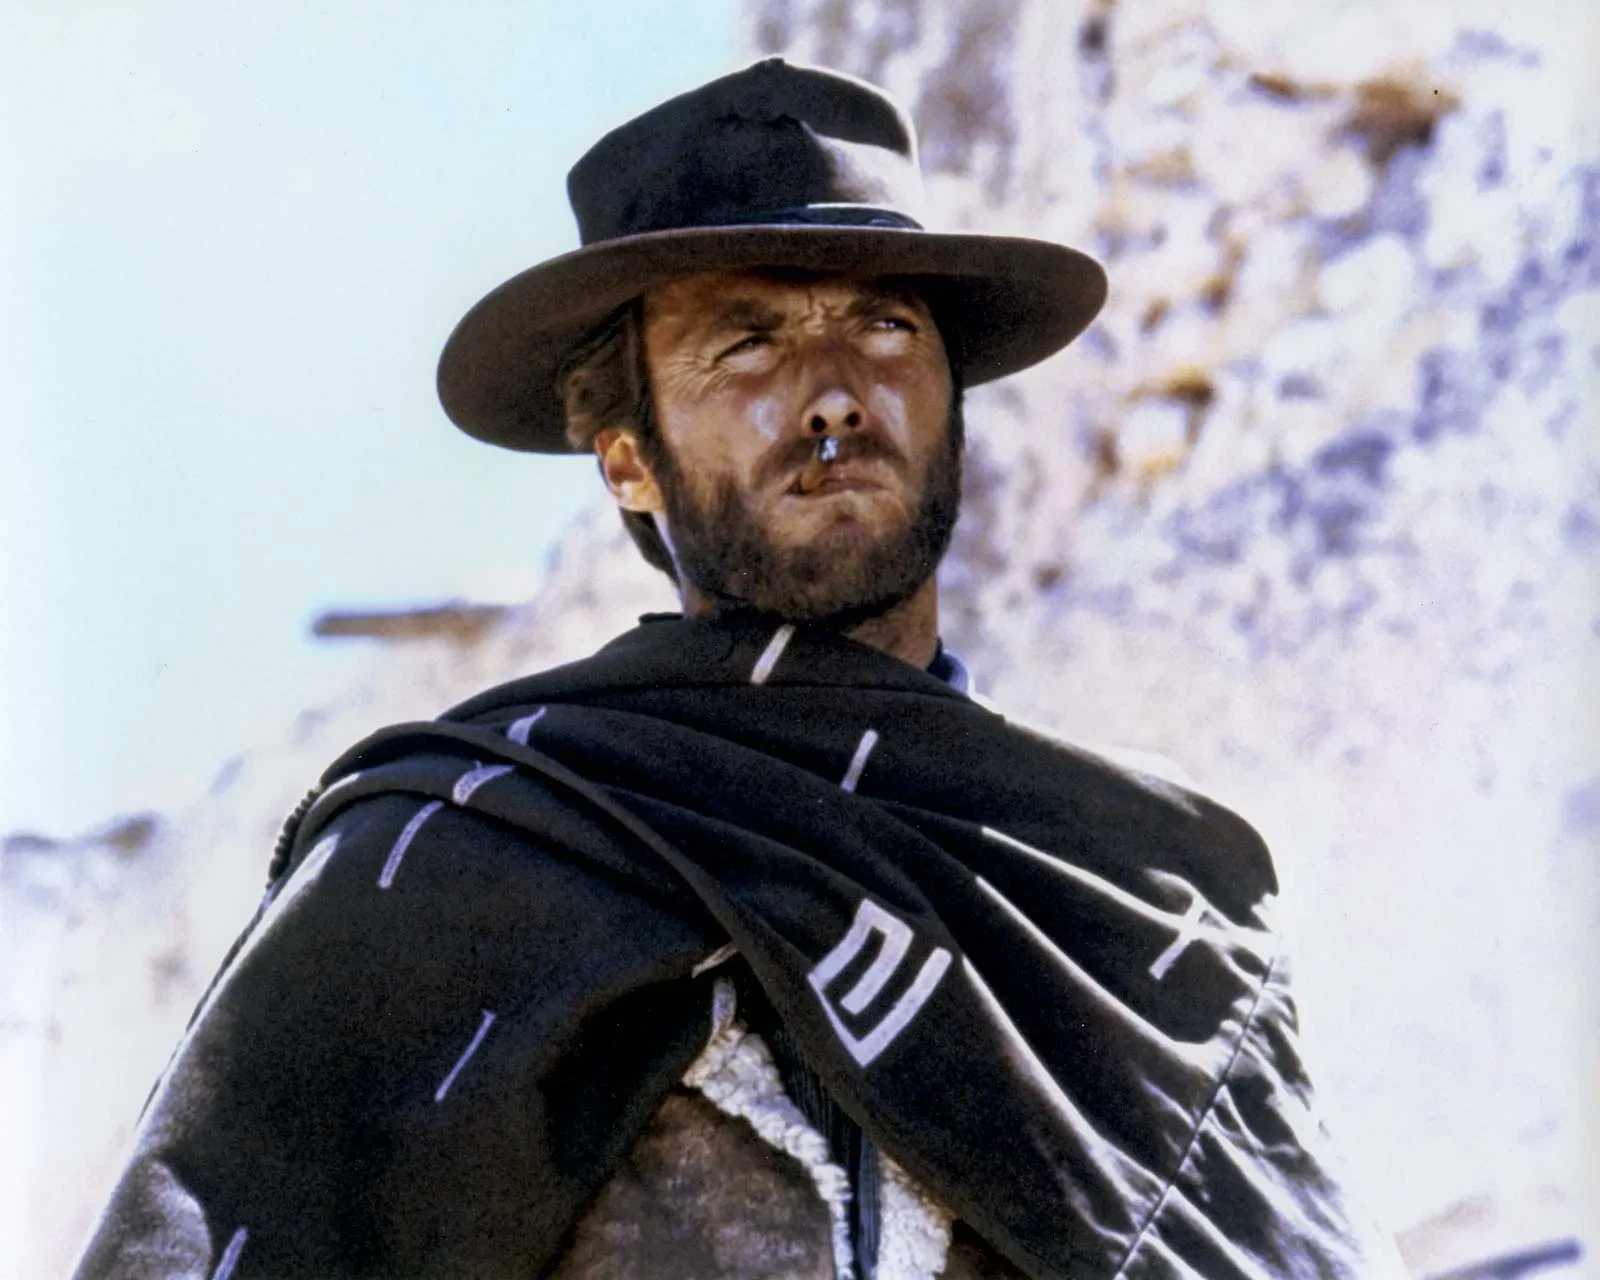 Clint Eastwood in the Dollars trilogy